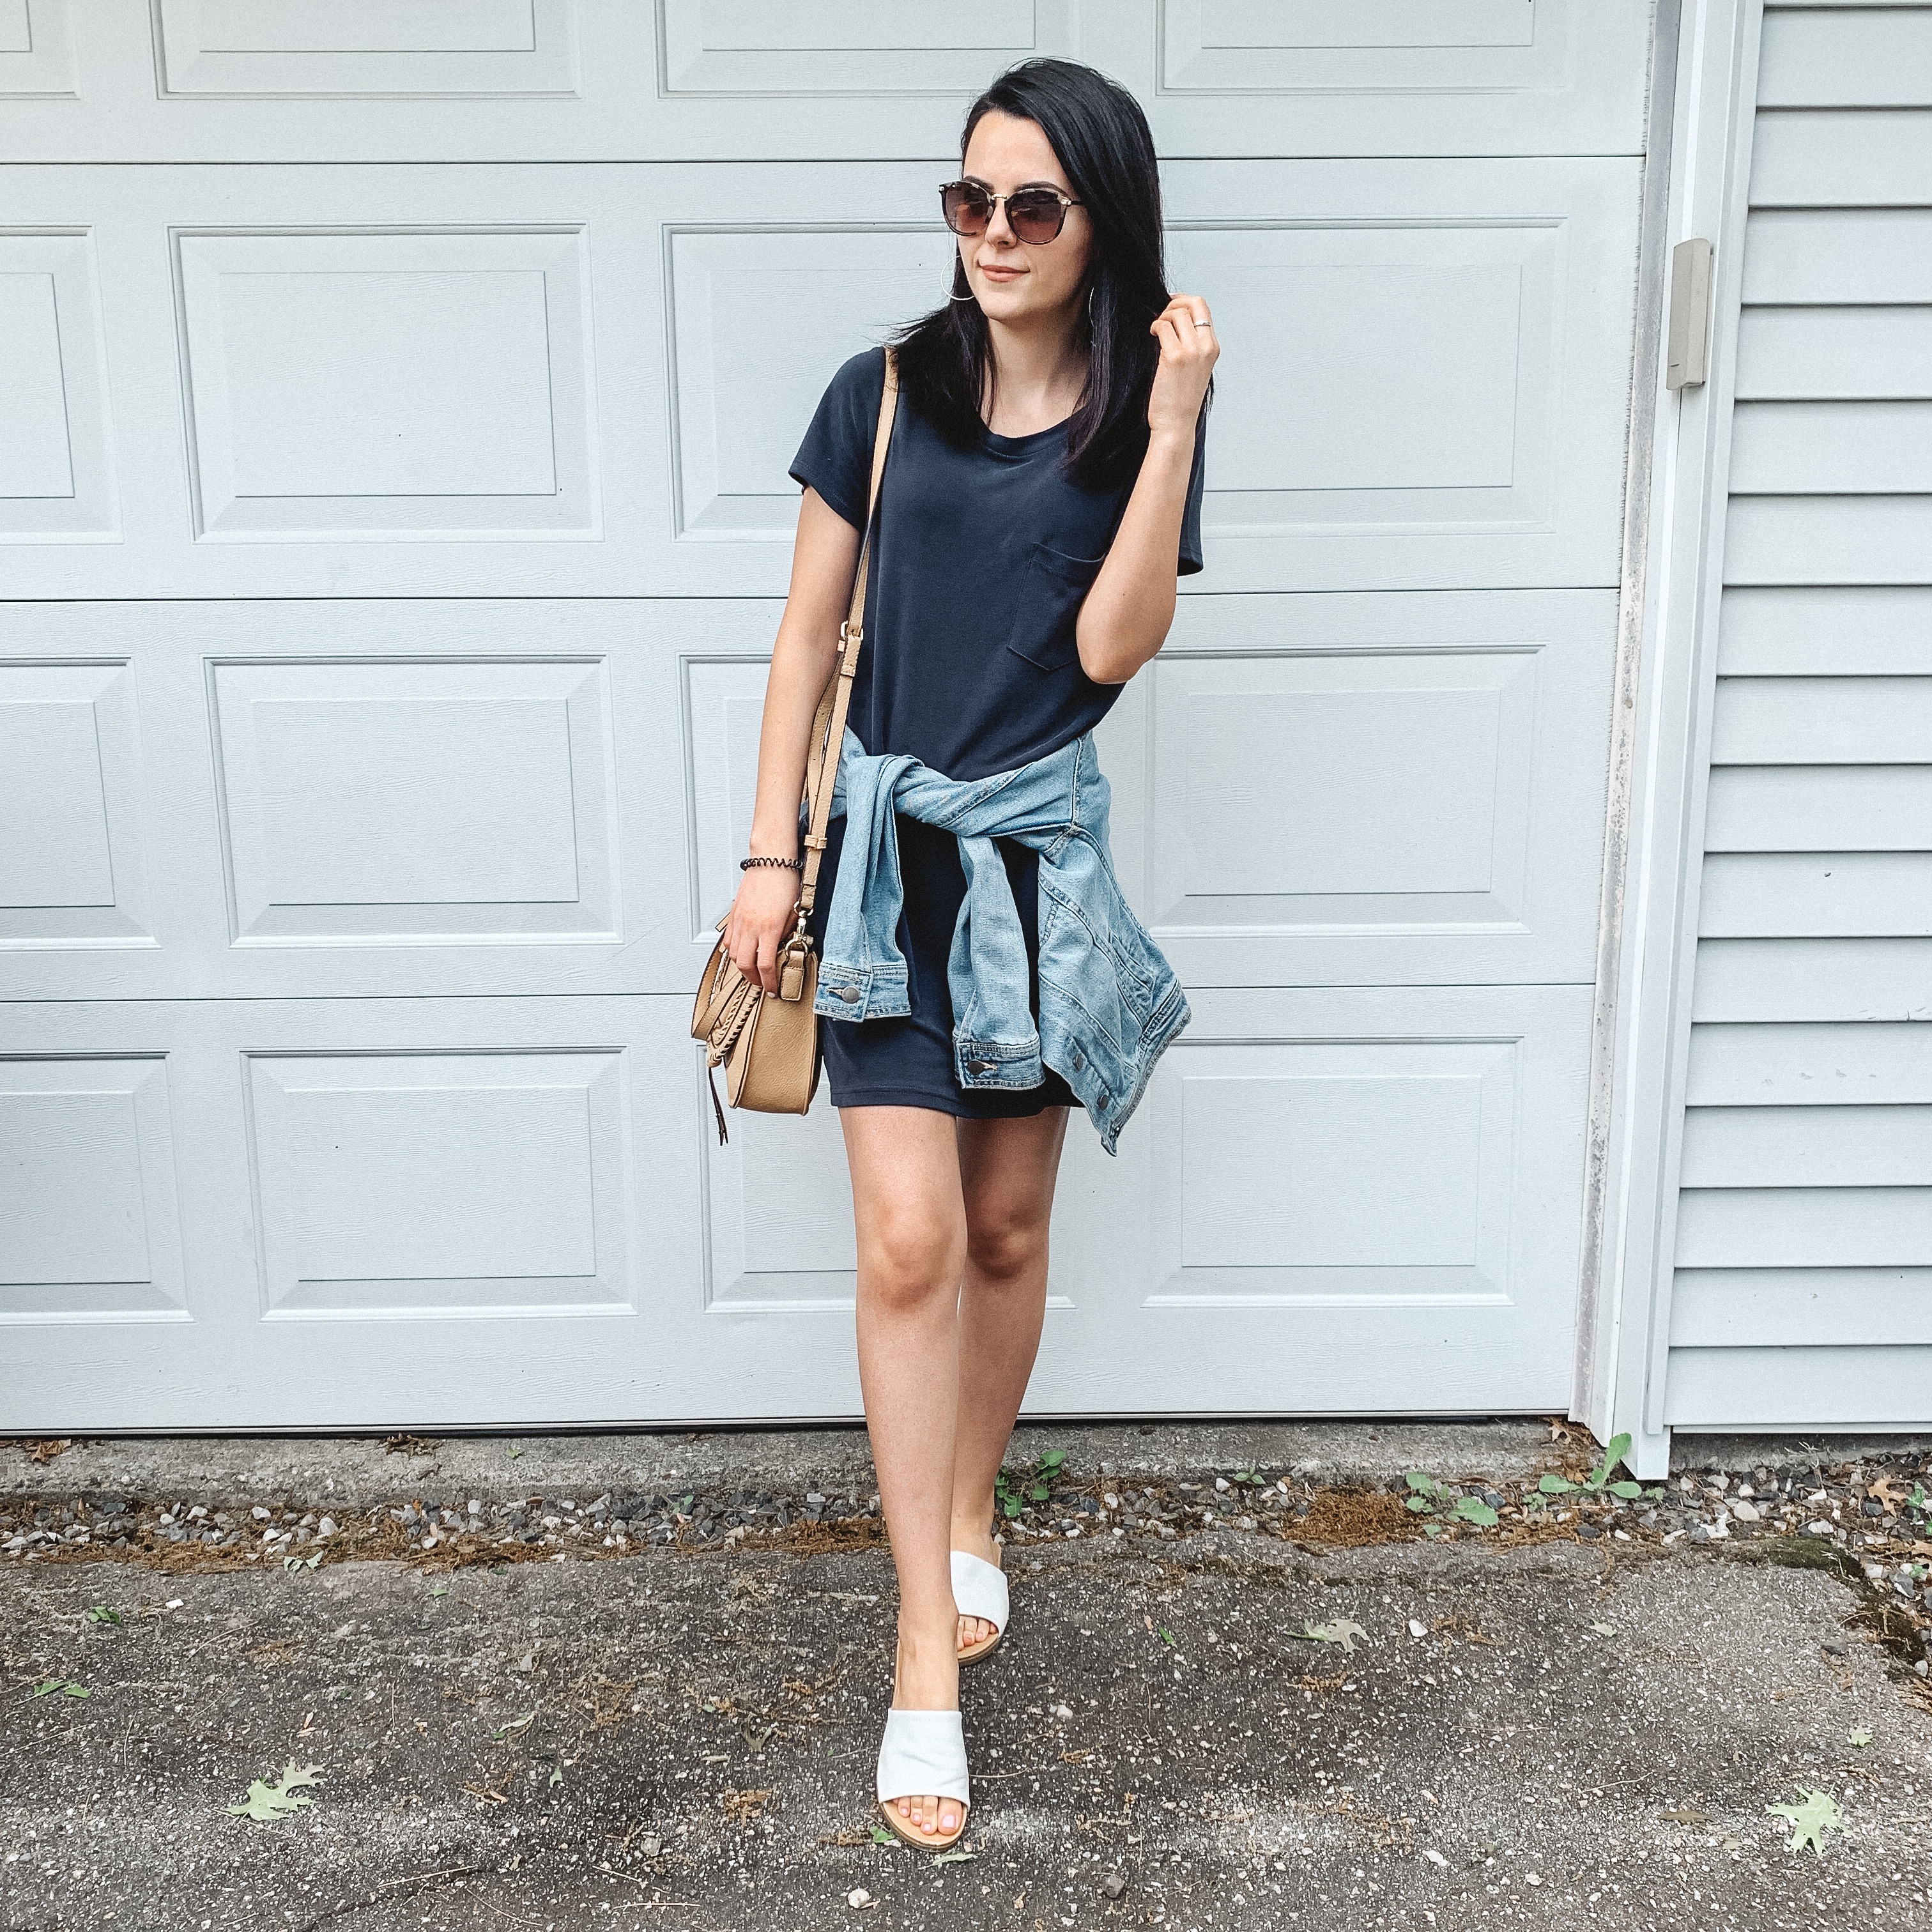 3 Must Have Travel Outfits for Summer